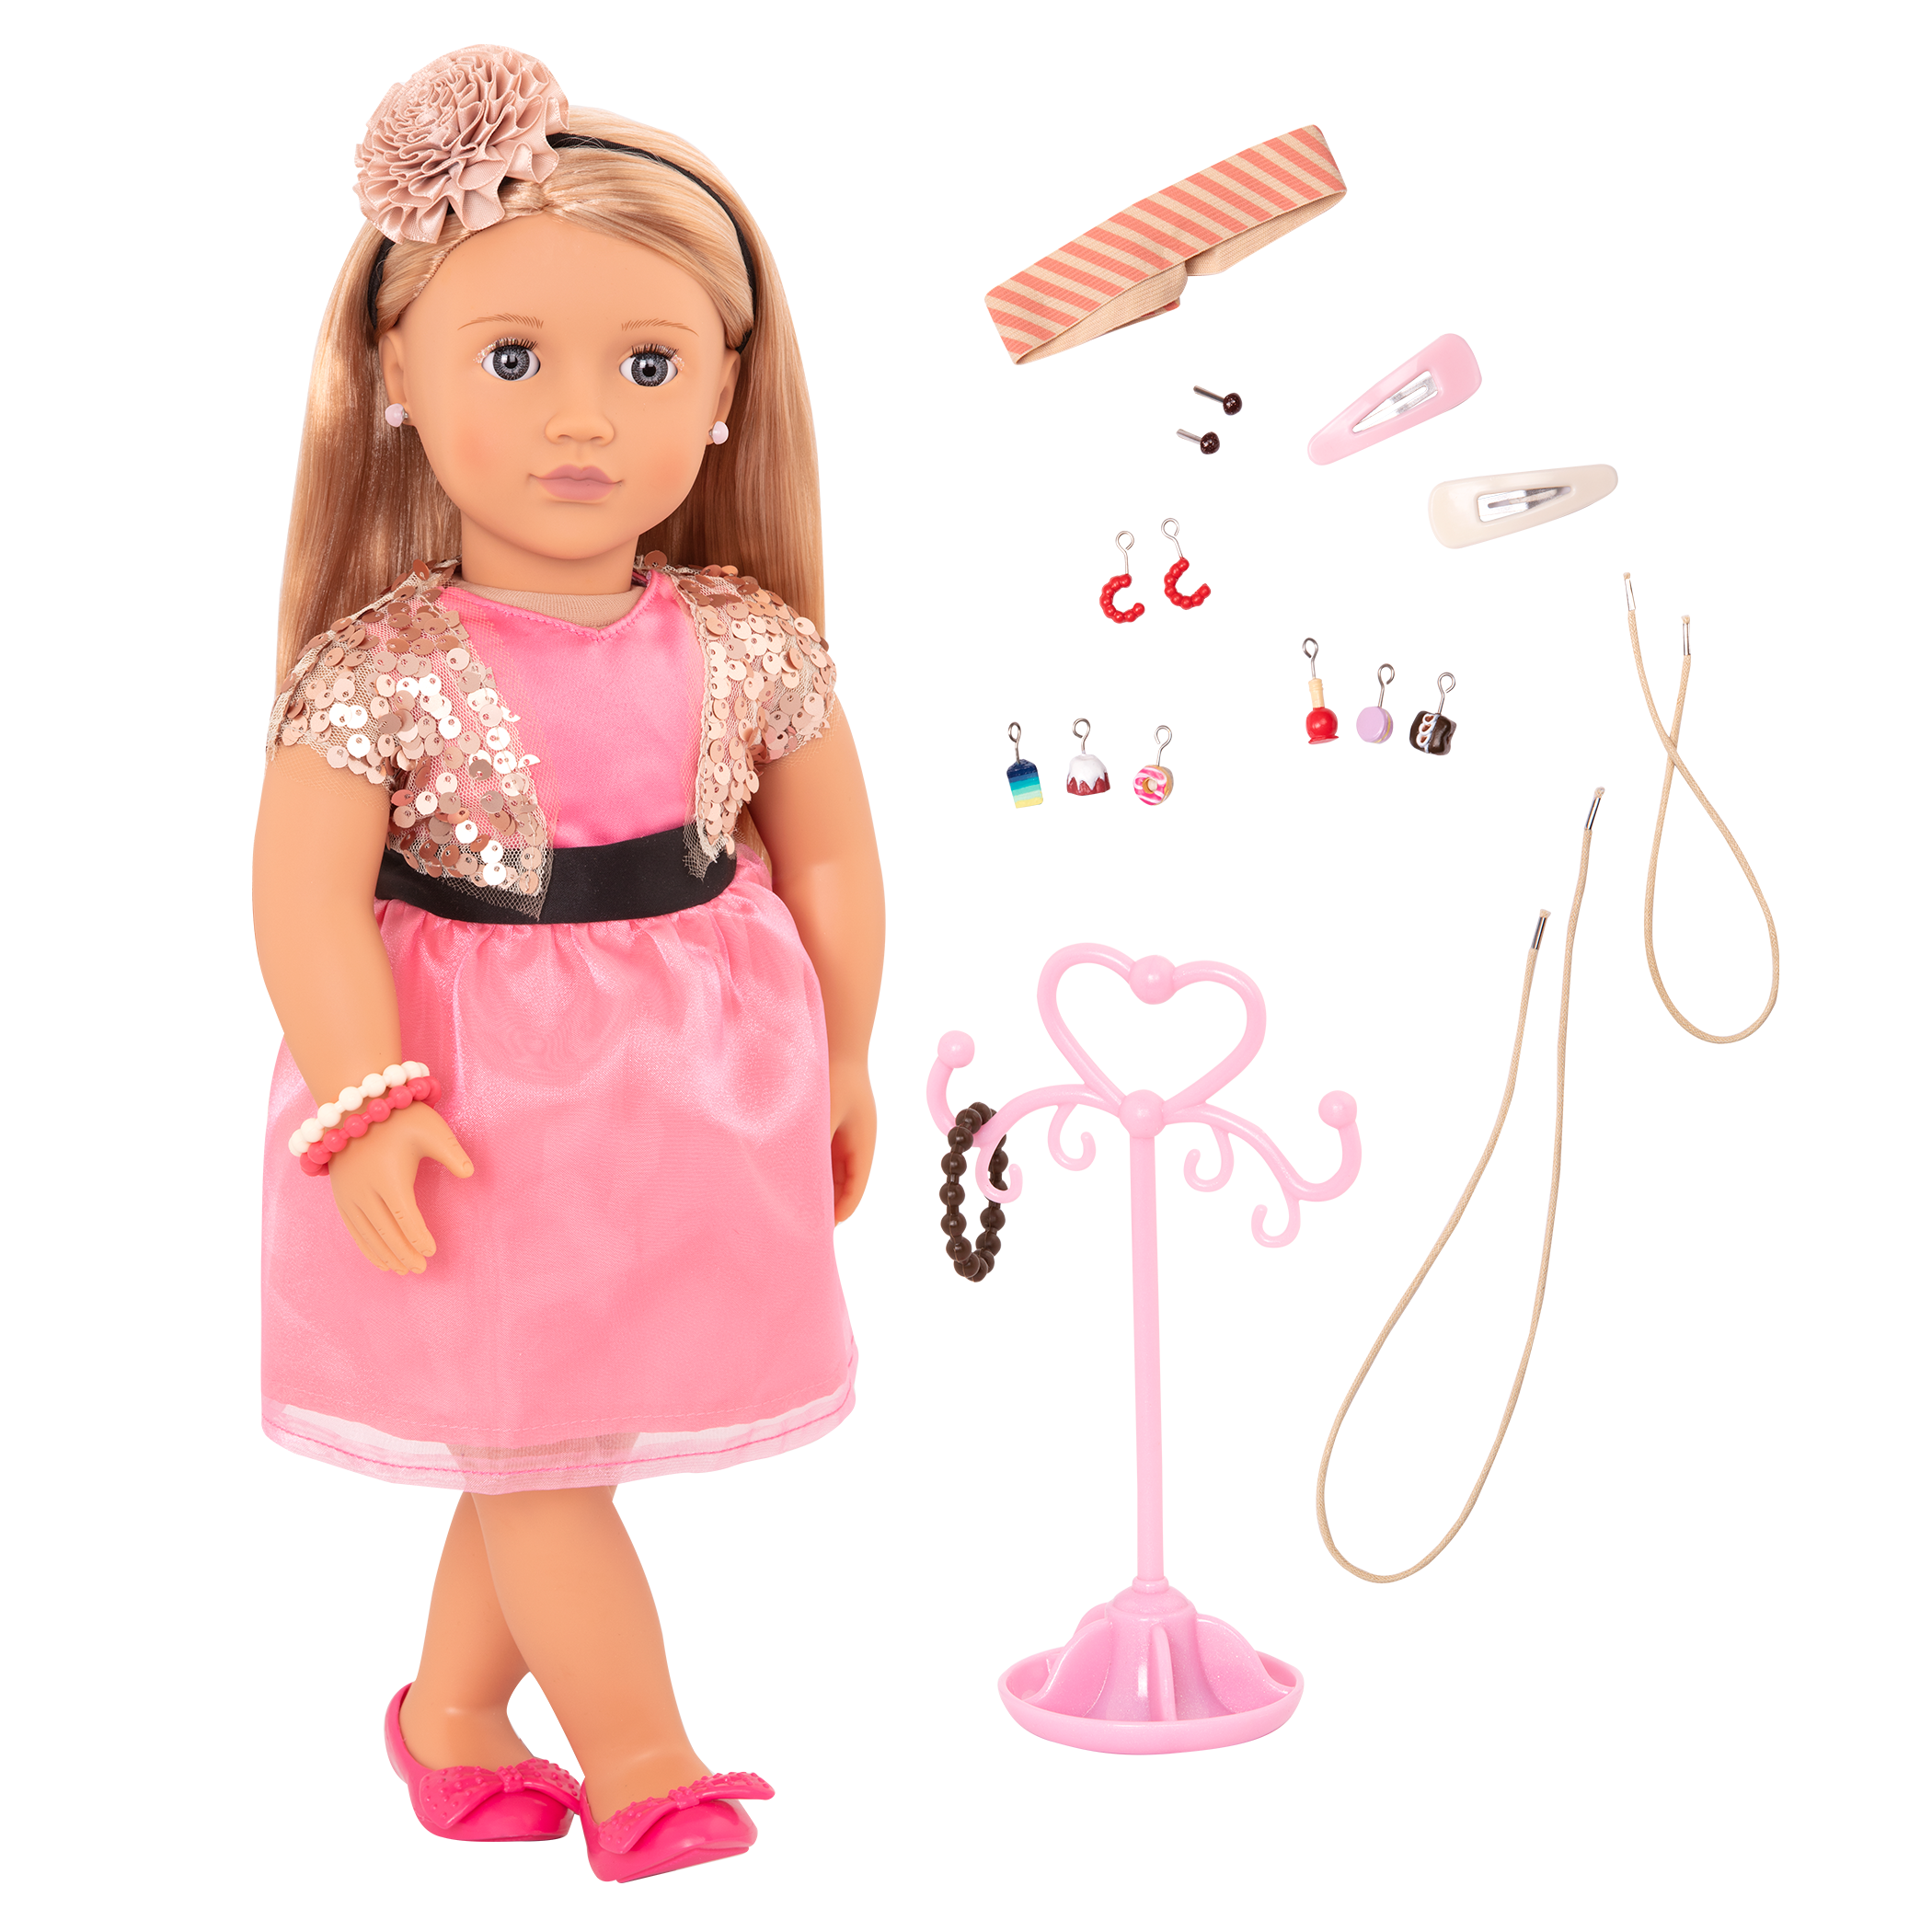 18-inch doll with blonde hair, gray eyes, jewelry and stand